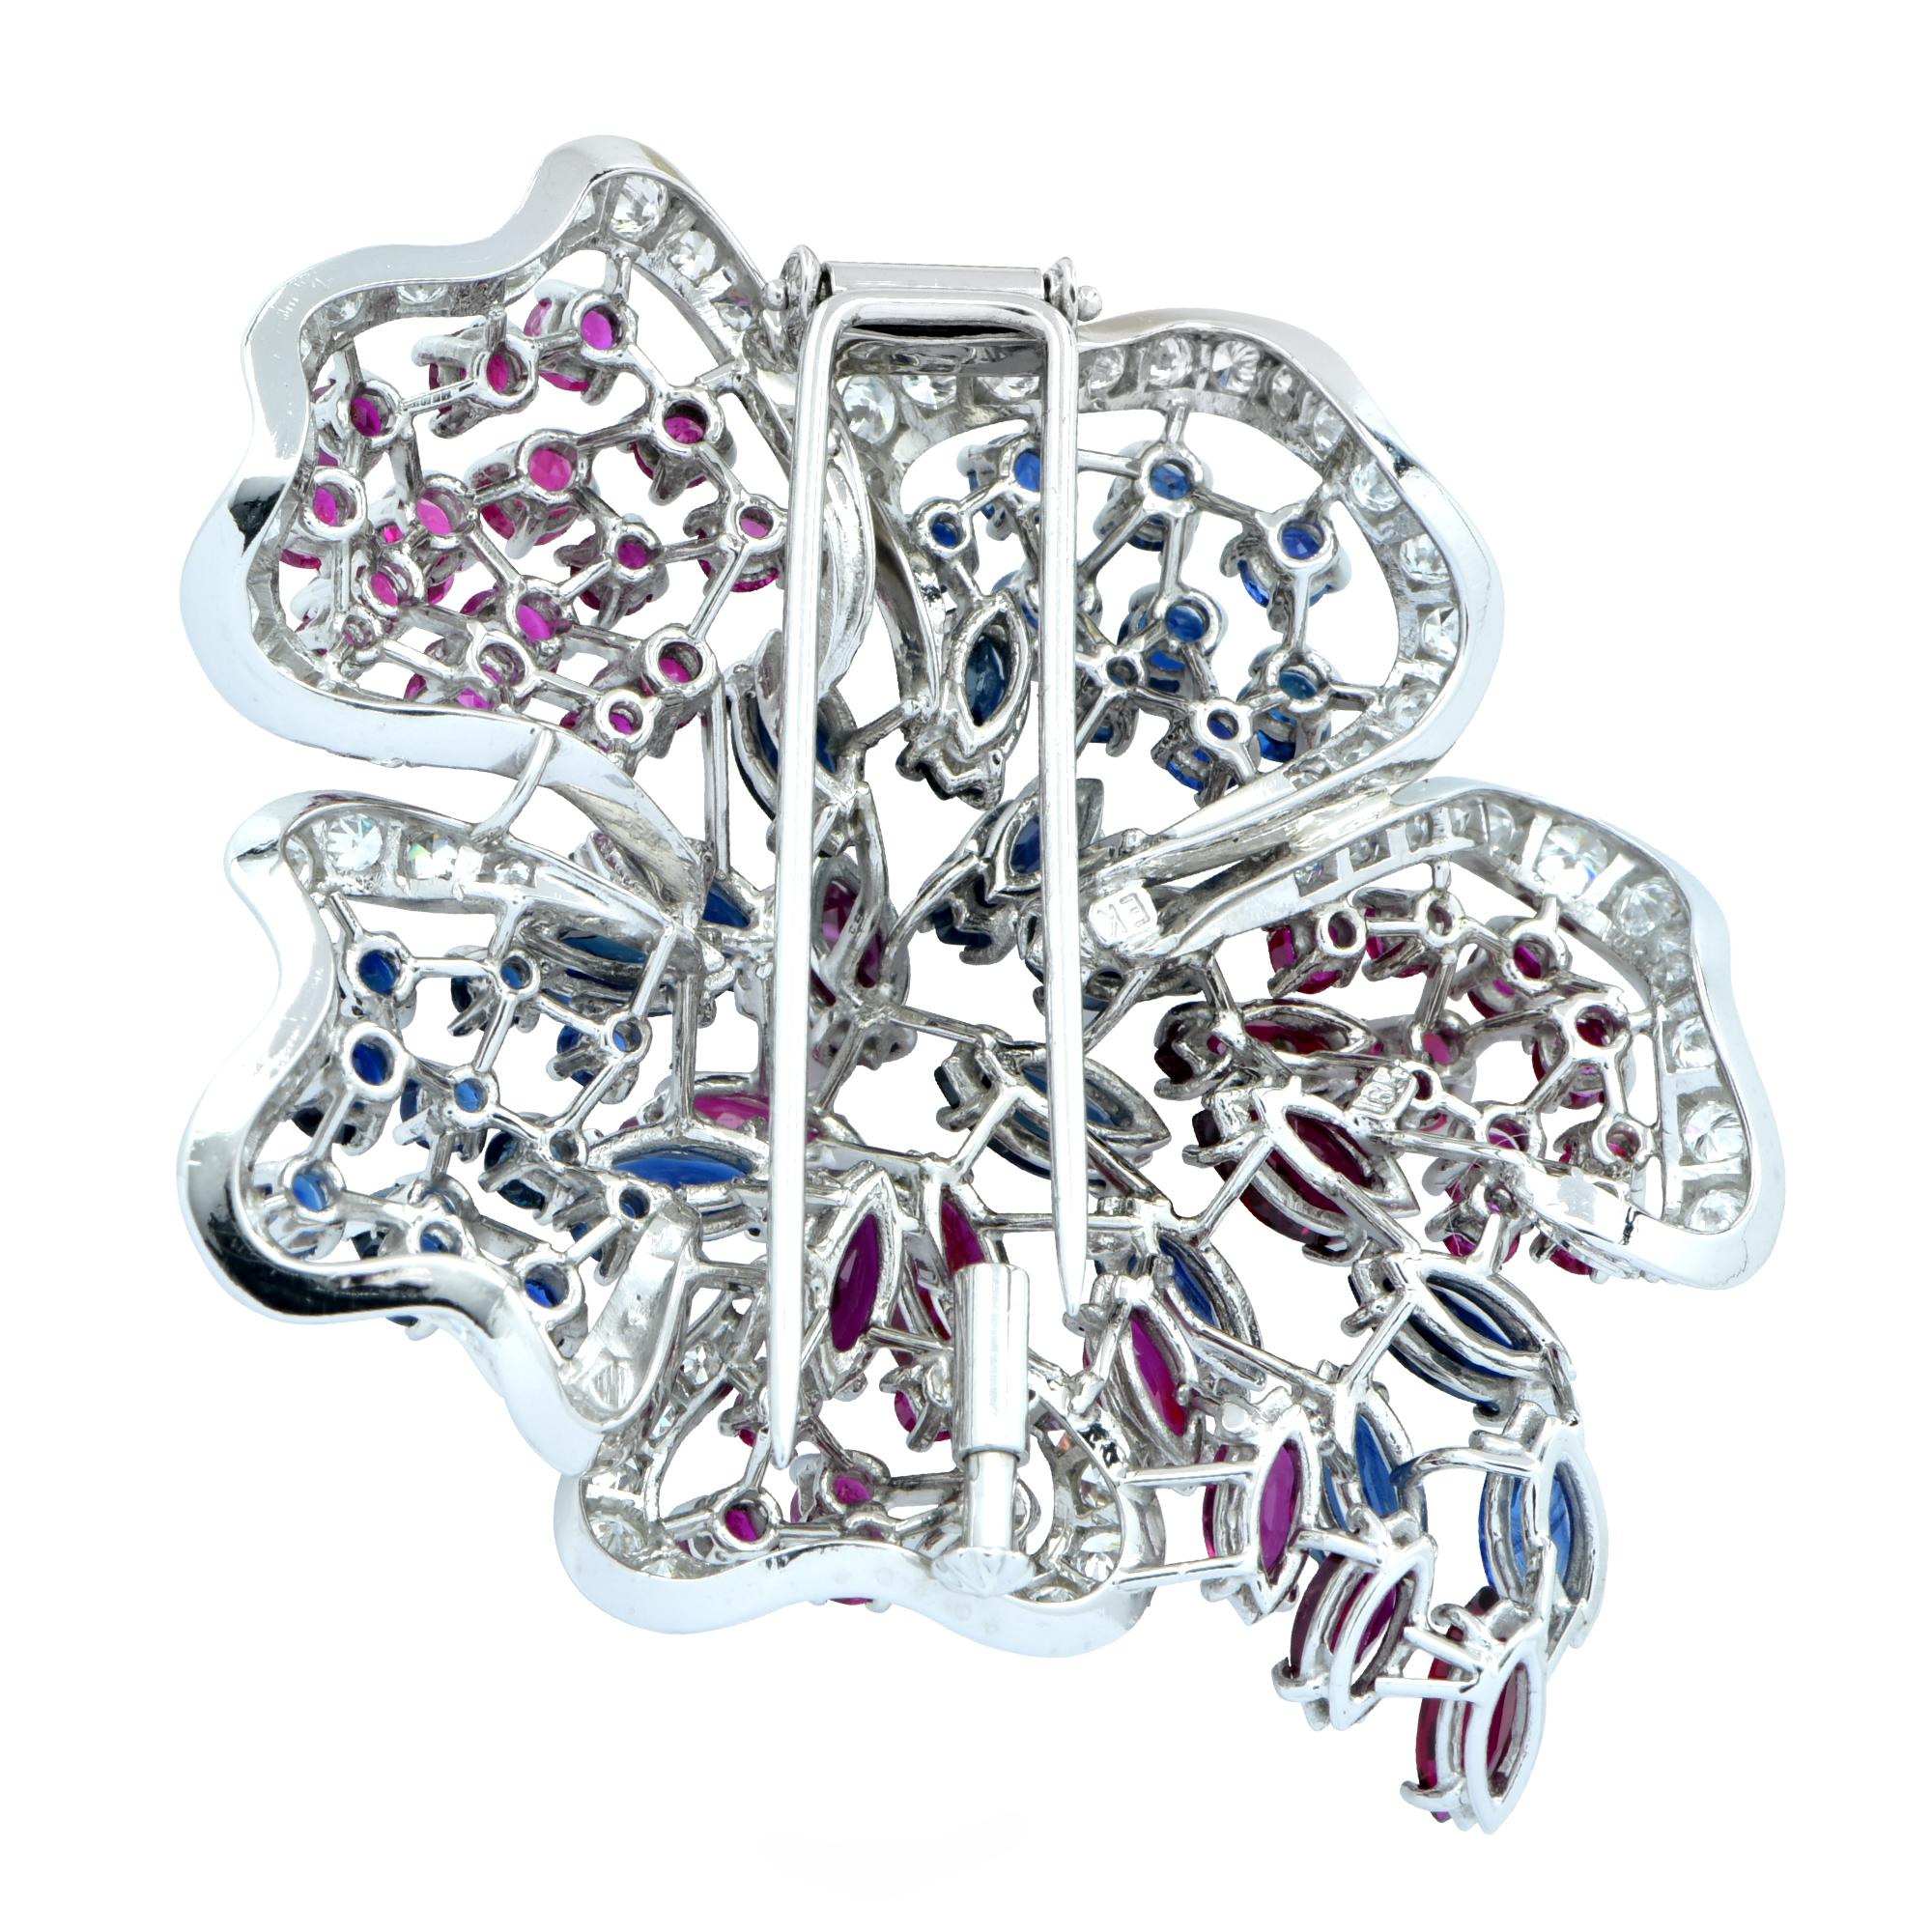 18k white gold brooch featuring approximately 3cts of round brilliant cut diamonds F color VS clarity. Accented by approximately 8cts of rubies and sapphires. This statement piece measures 2.2 inches by 1.8 inches.

Our pieces are all accompanied by